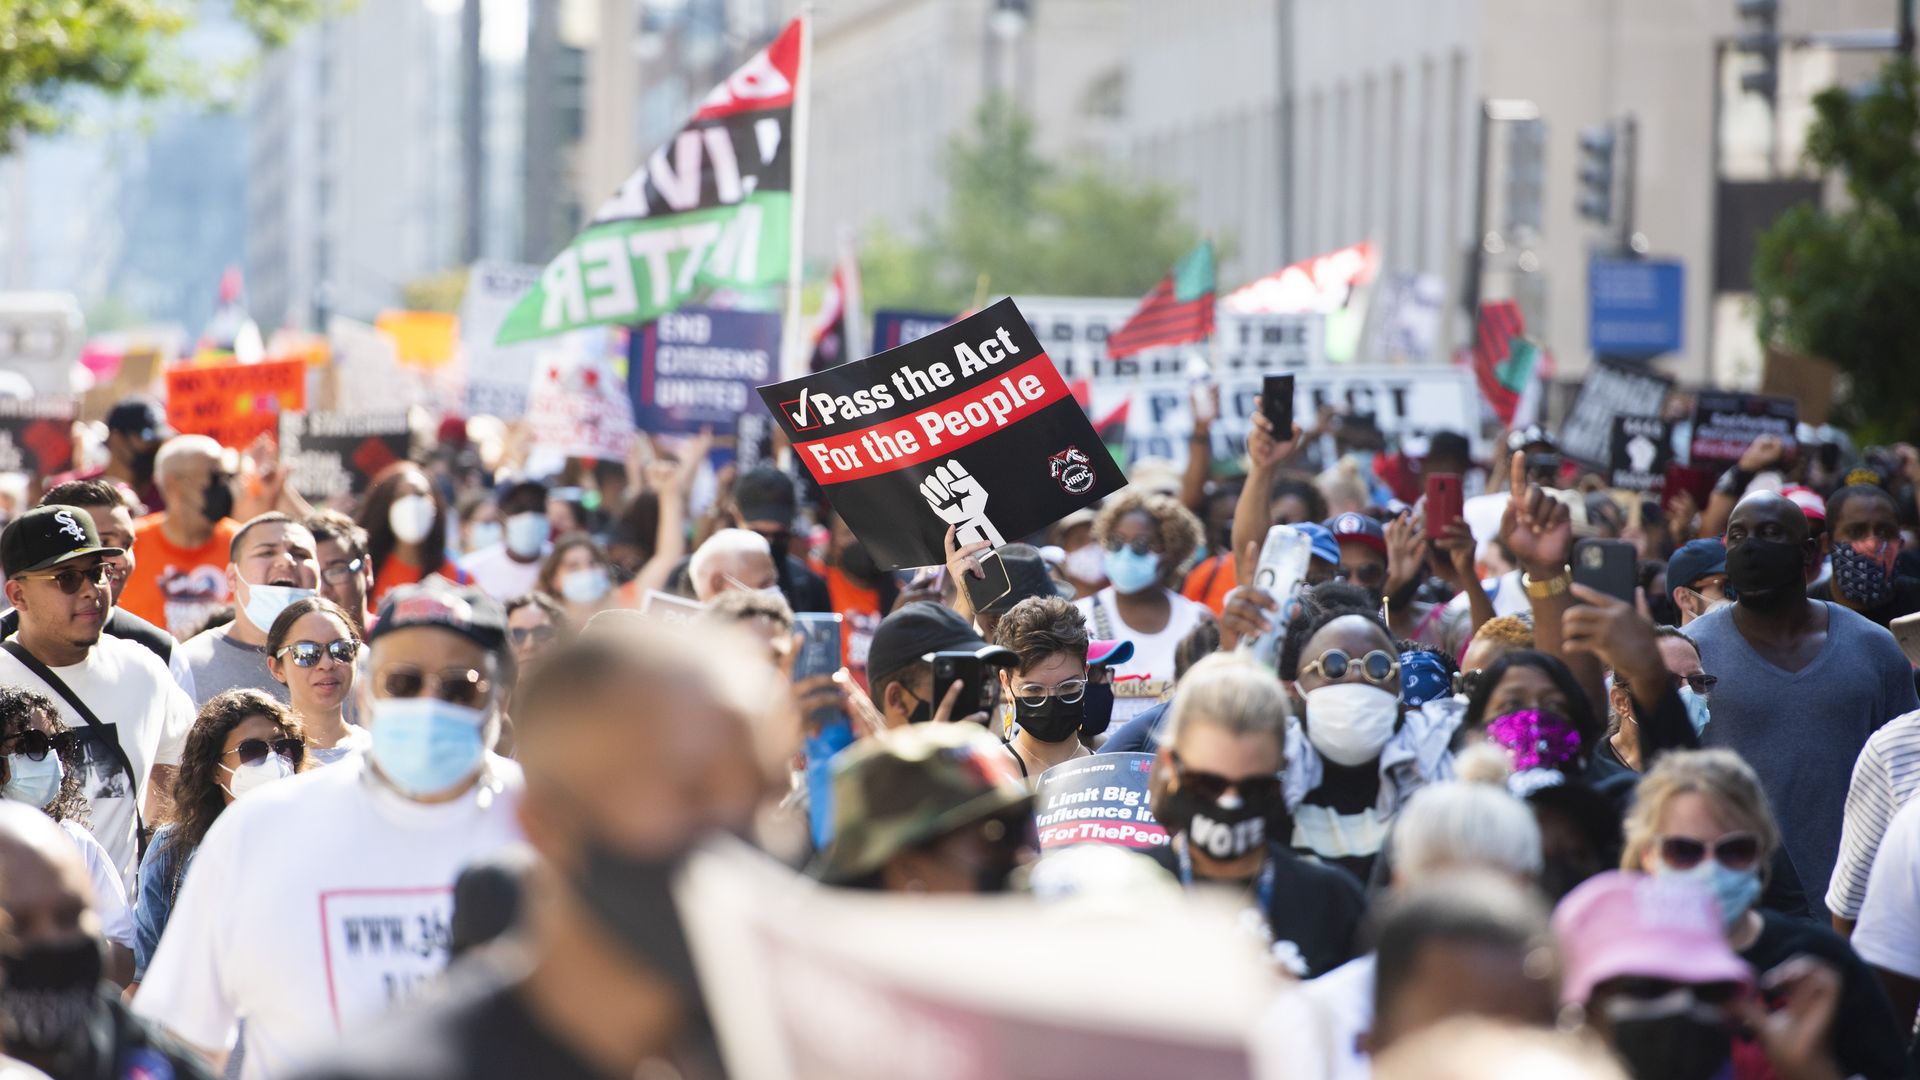 Demonstrators hold signs while walking during the March On for Washington and Voting Rights rally in Washington, D.C., U.S., on Saturday, Aug. 28, 2021